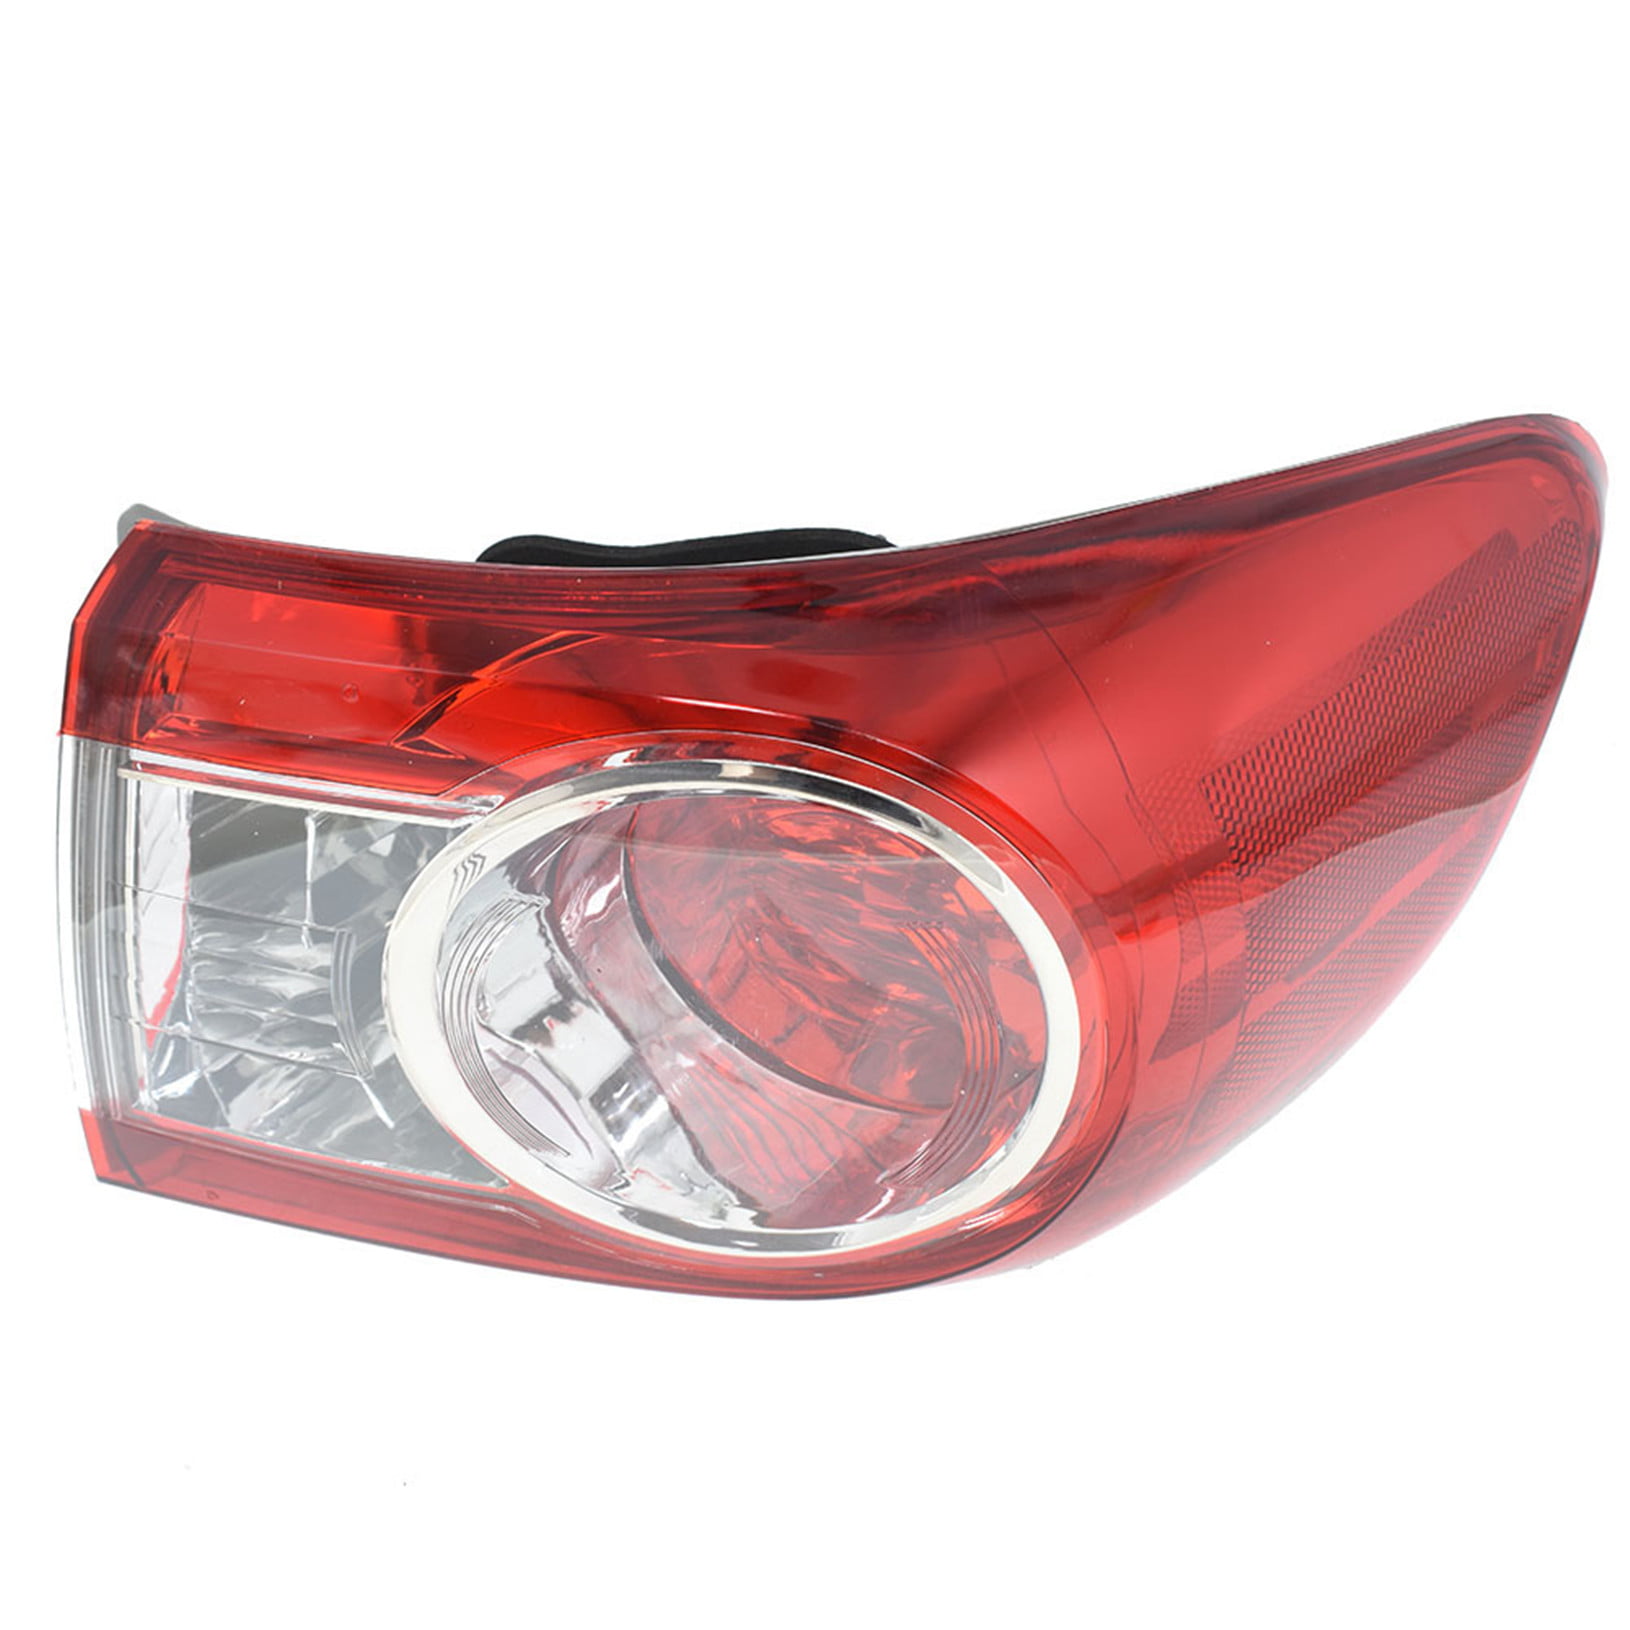 Tail Light for Mercury Grand Marquis 03-11 Lens and Housing Right Side 